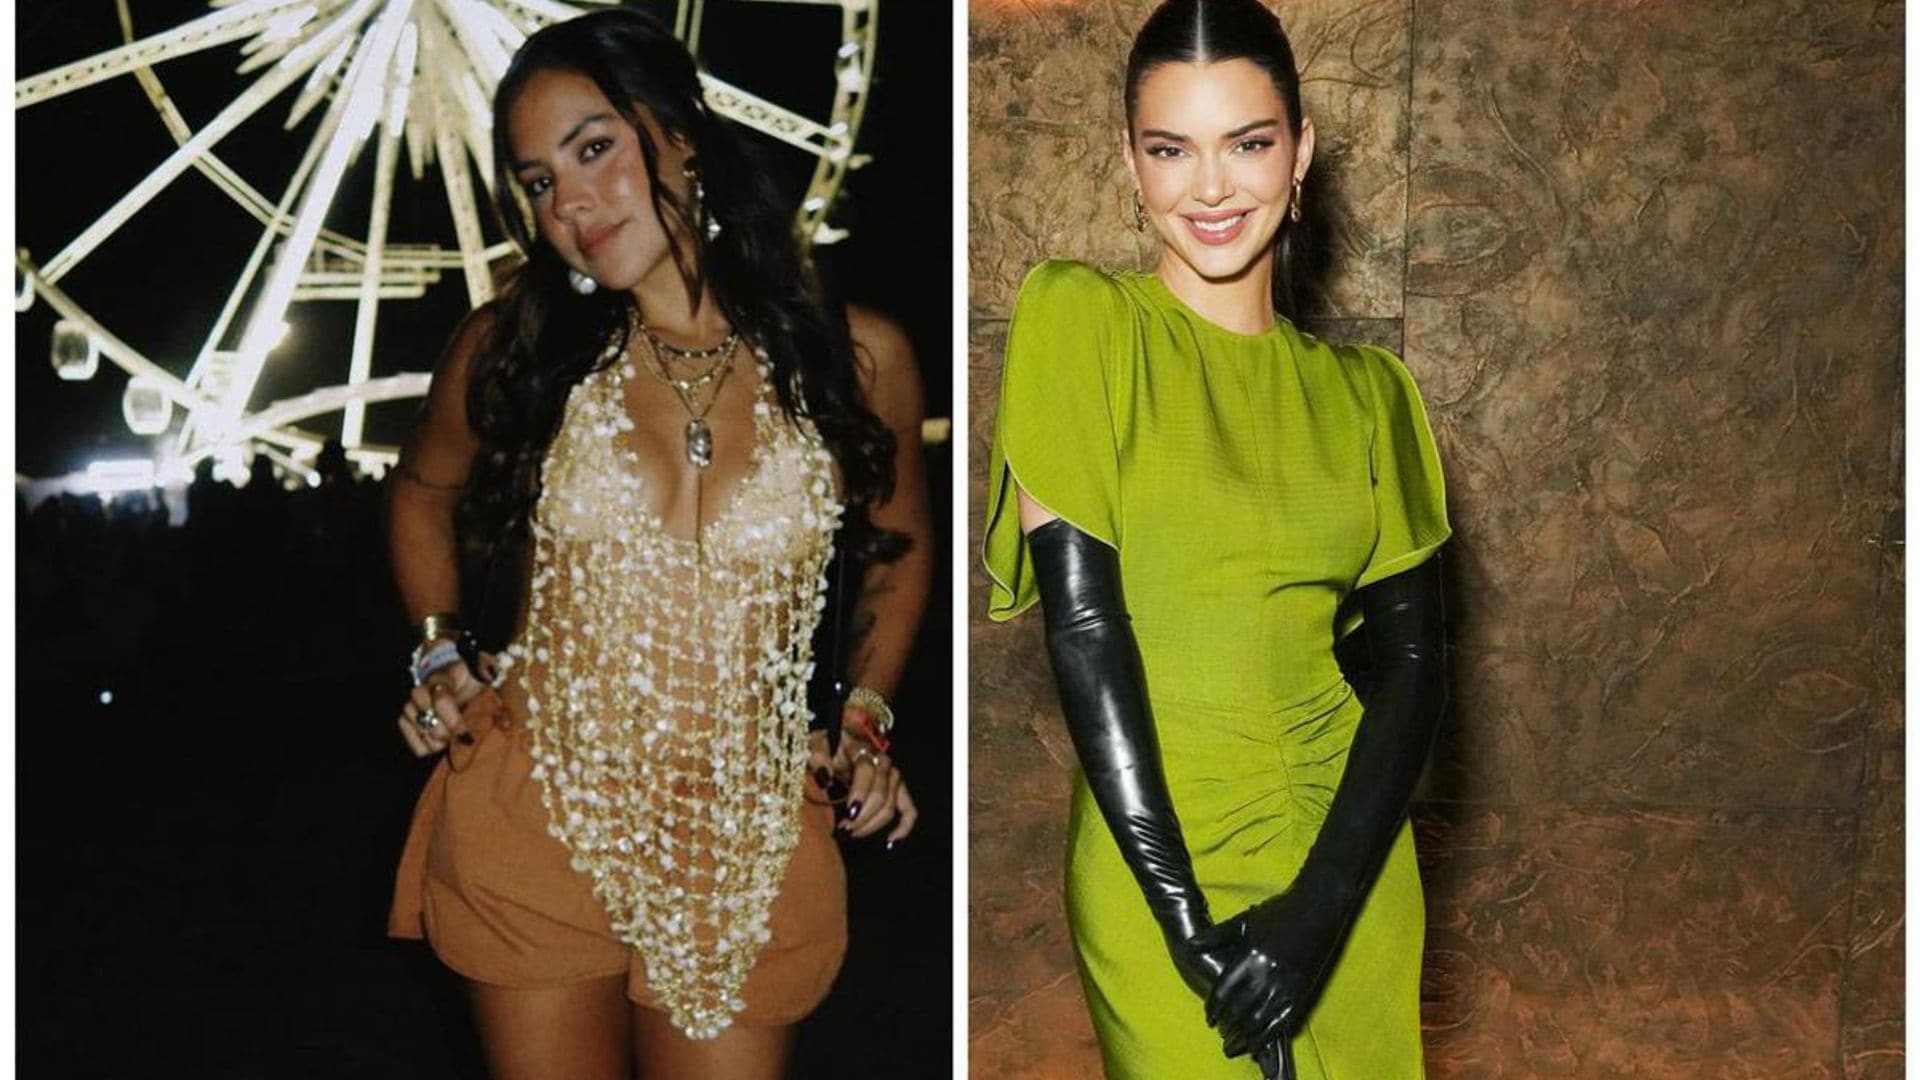 Bad Bunny’s ex Gabriela and Kendall Jenner crossed paths at Coachella